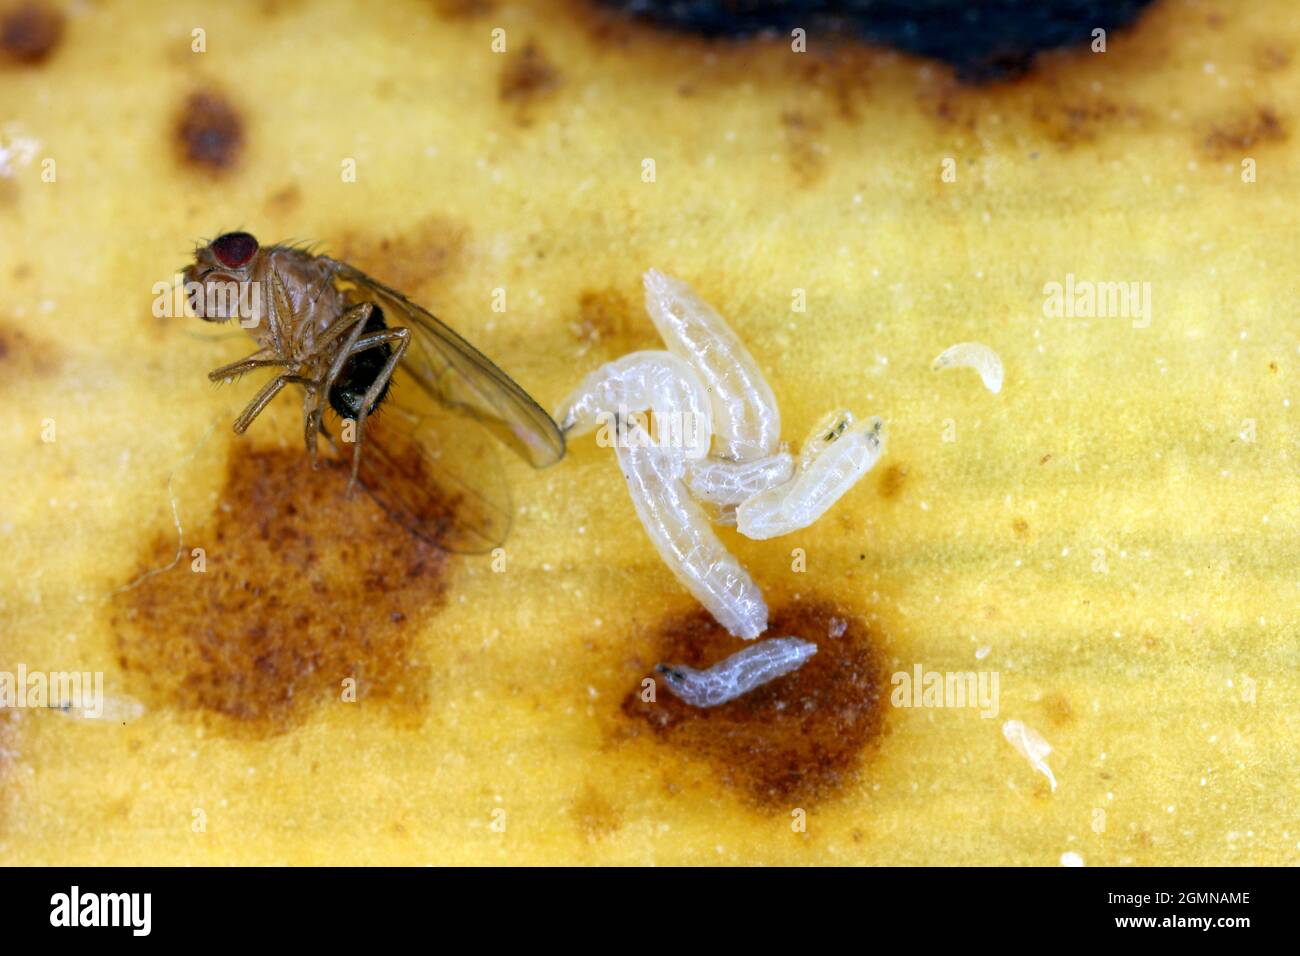 Common fruit fly or vinegar fly - Drosophila melanogaster and larvae - maggots. It is a species of fly in the family Drosophilidae. It is pest. Stock Photo